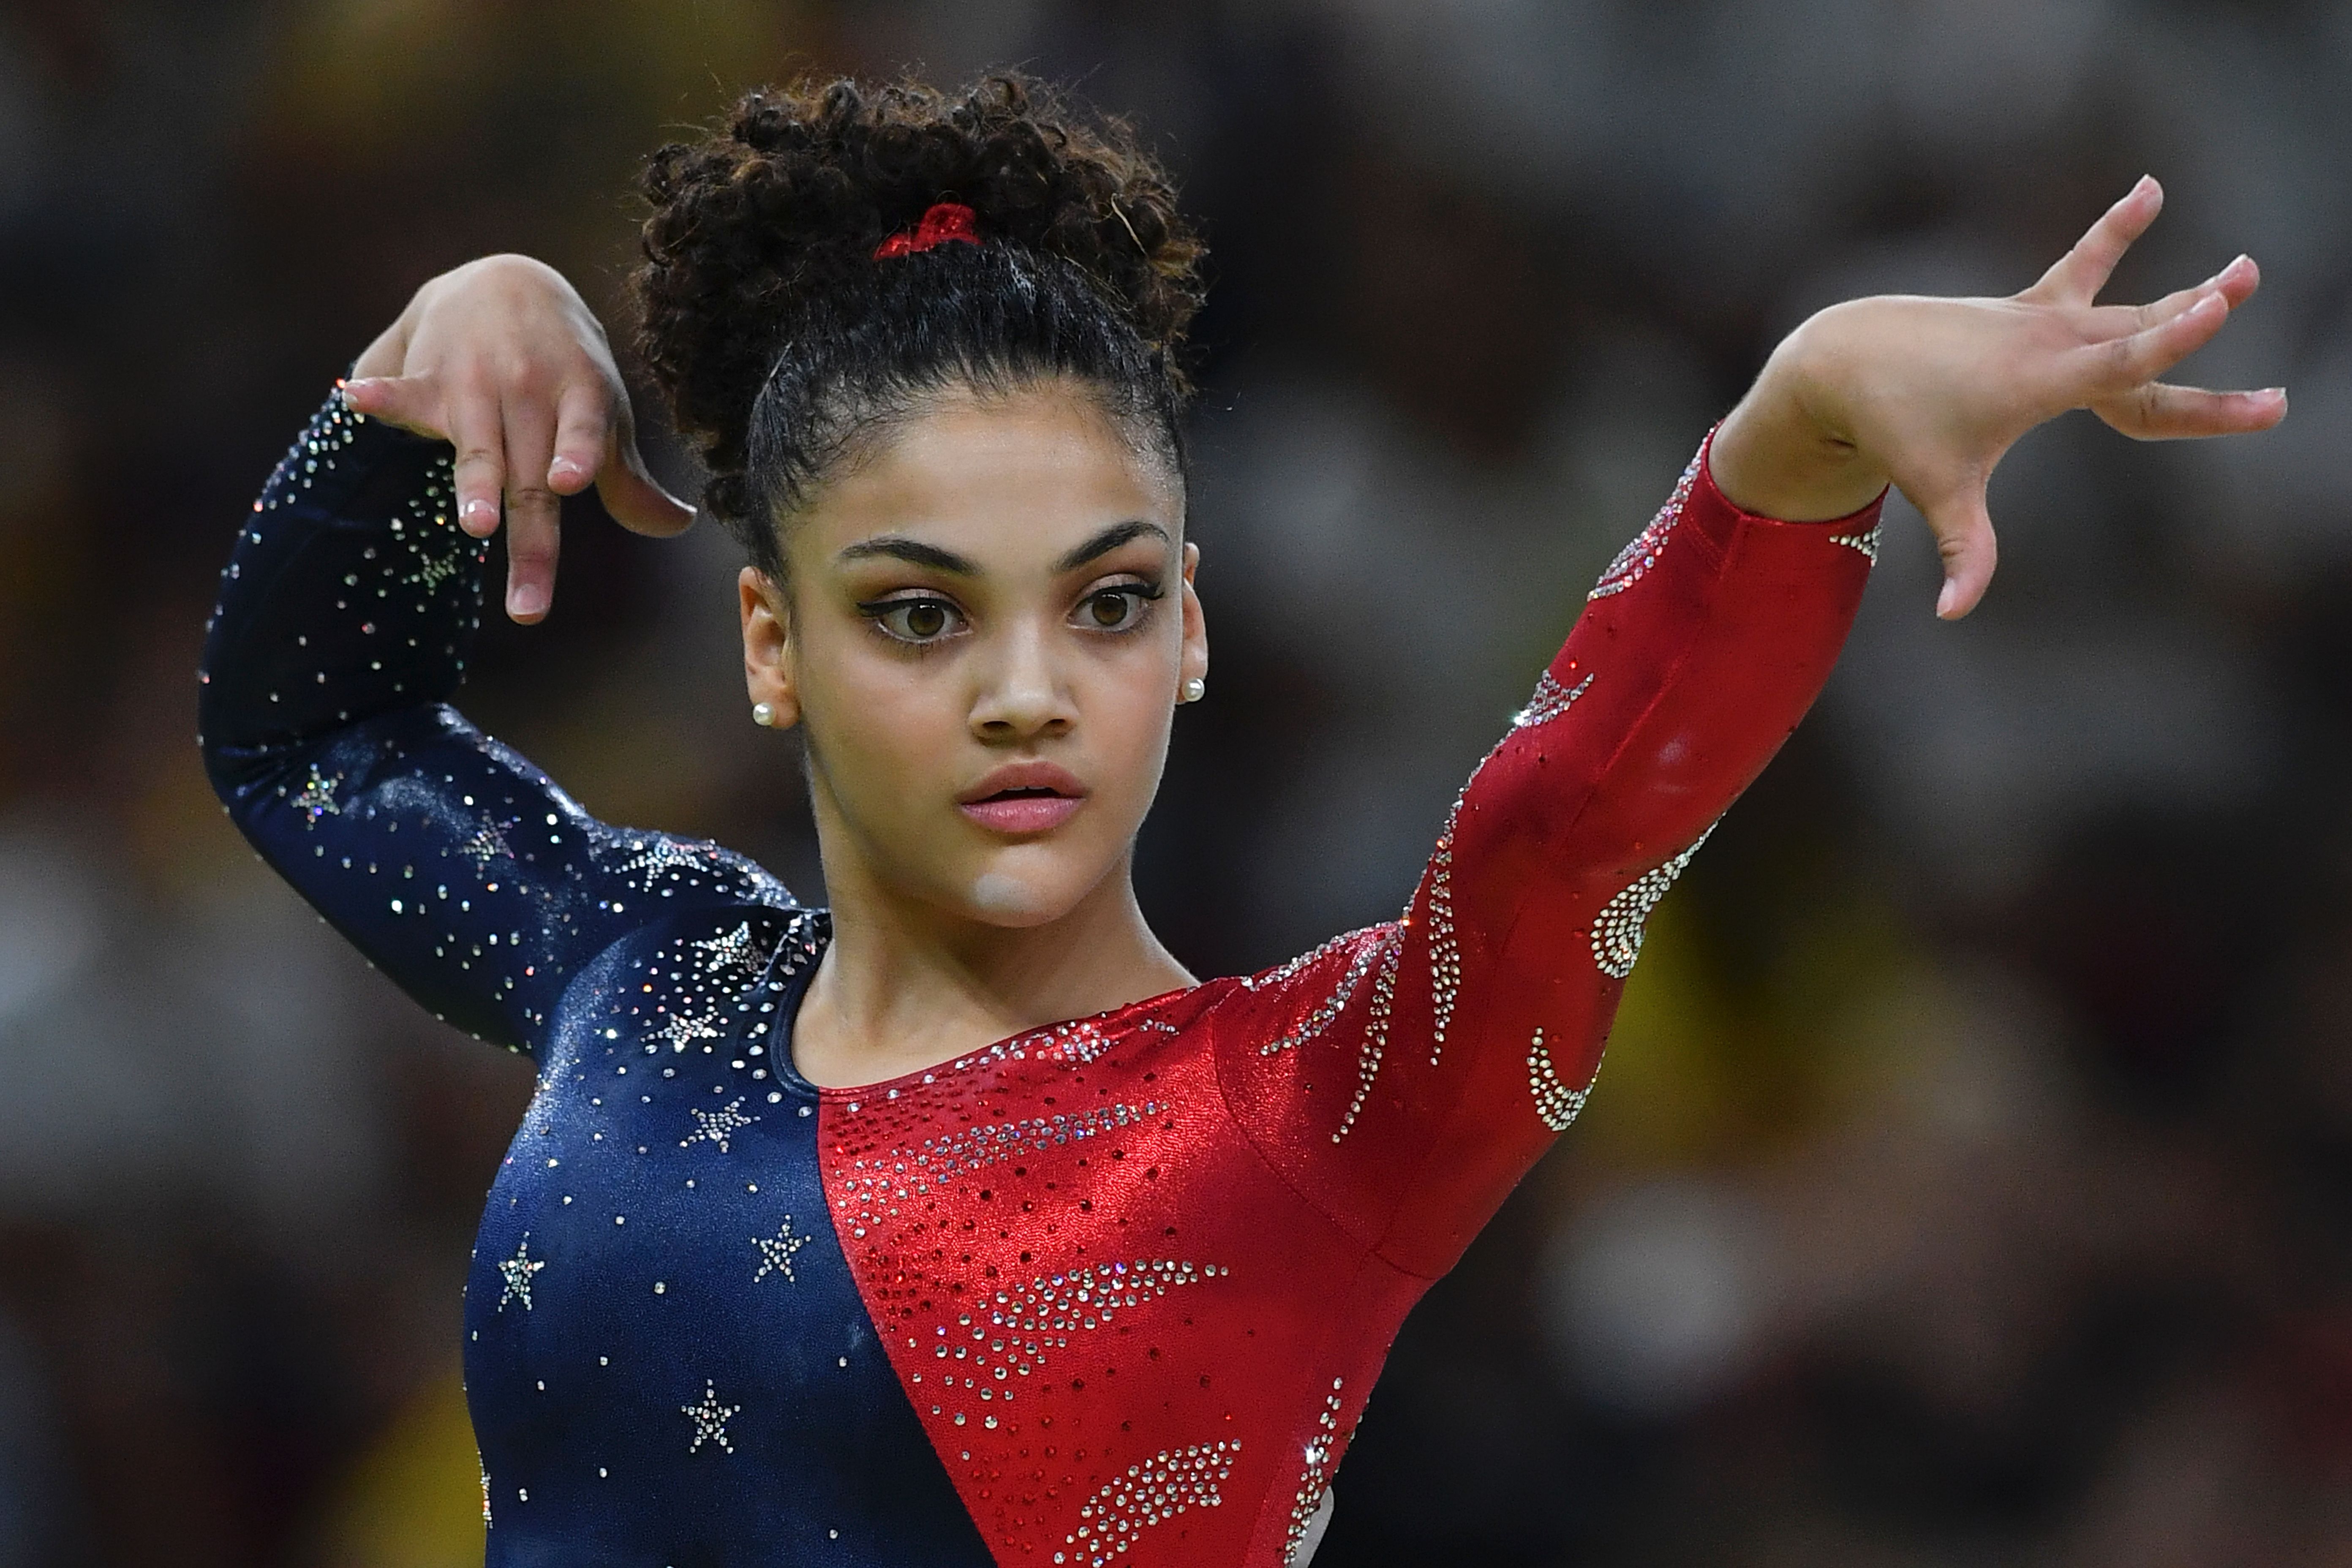 What Is Laurie Hernandez S Floor Music The Olympic Gymnast Has A